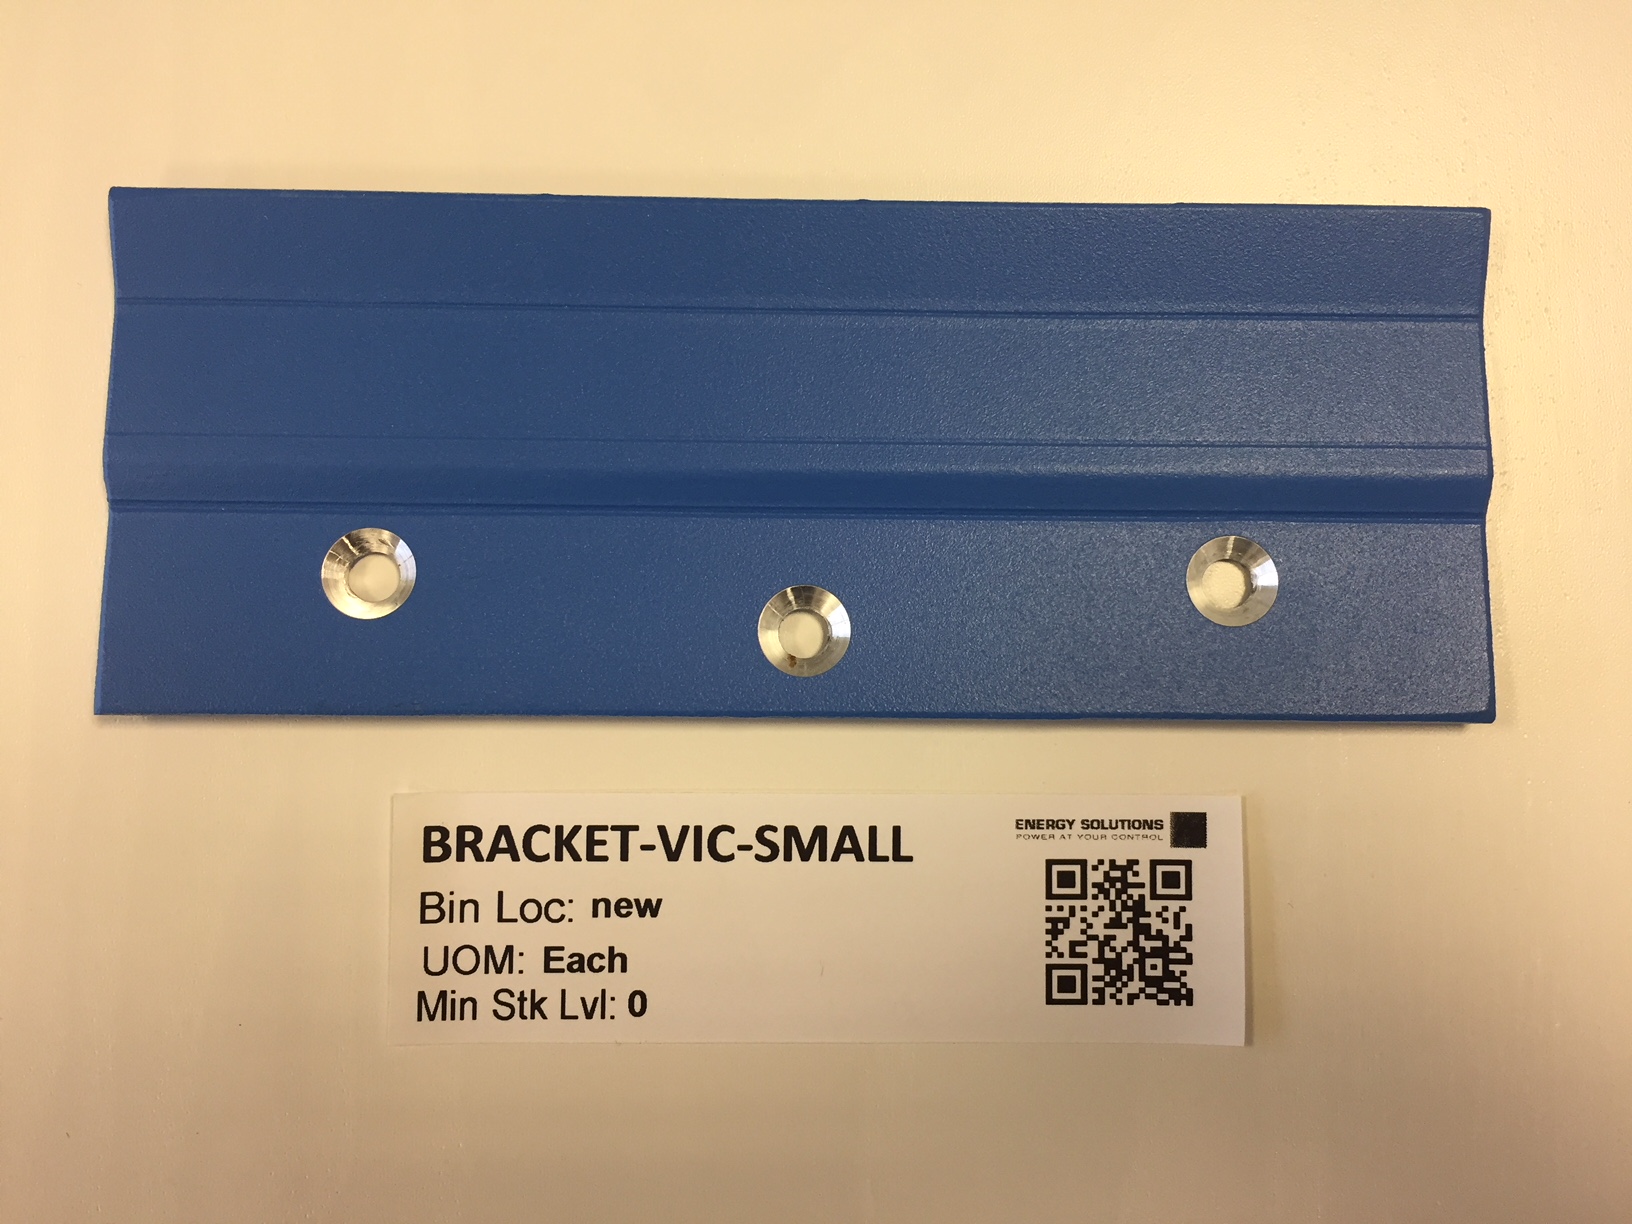 Mounting Bracket for Small Victron Enclosures